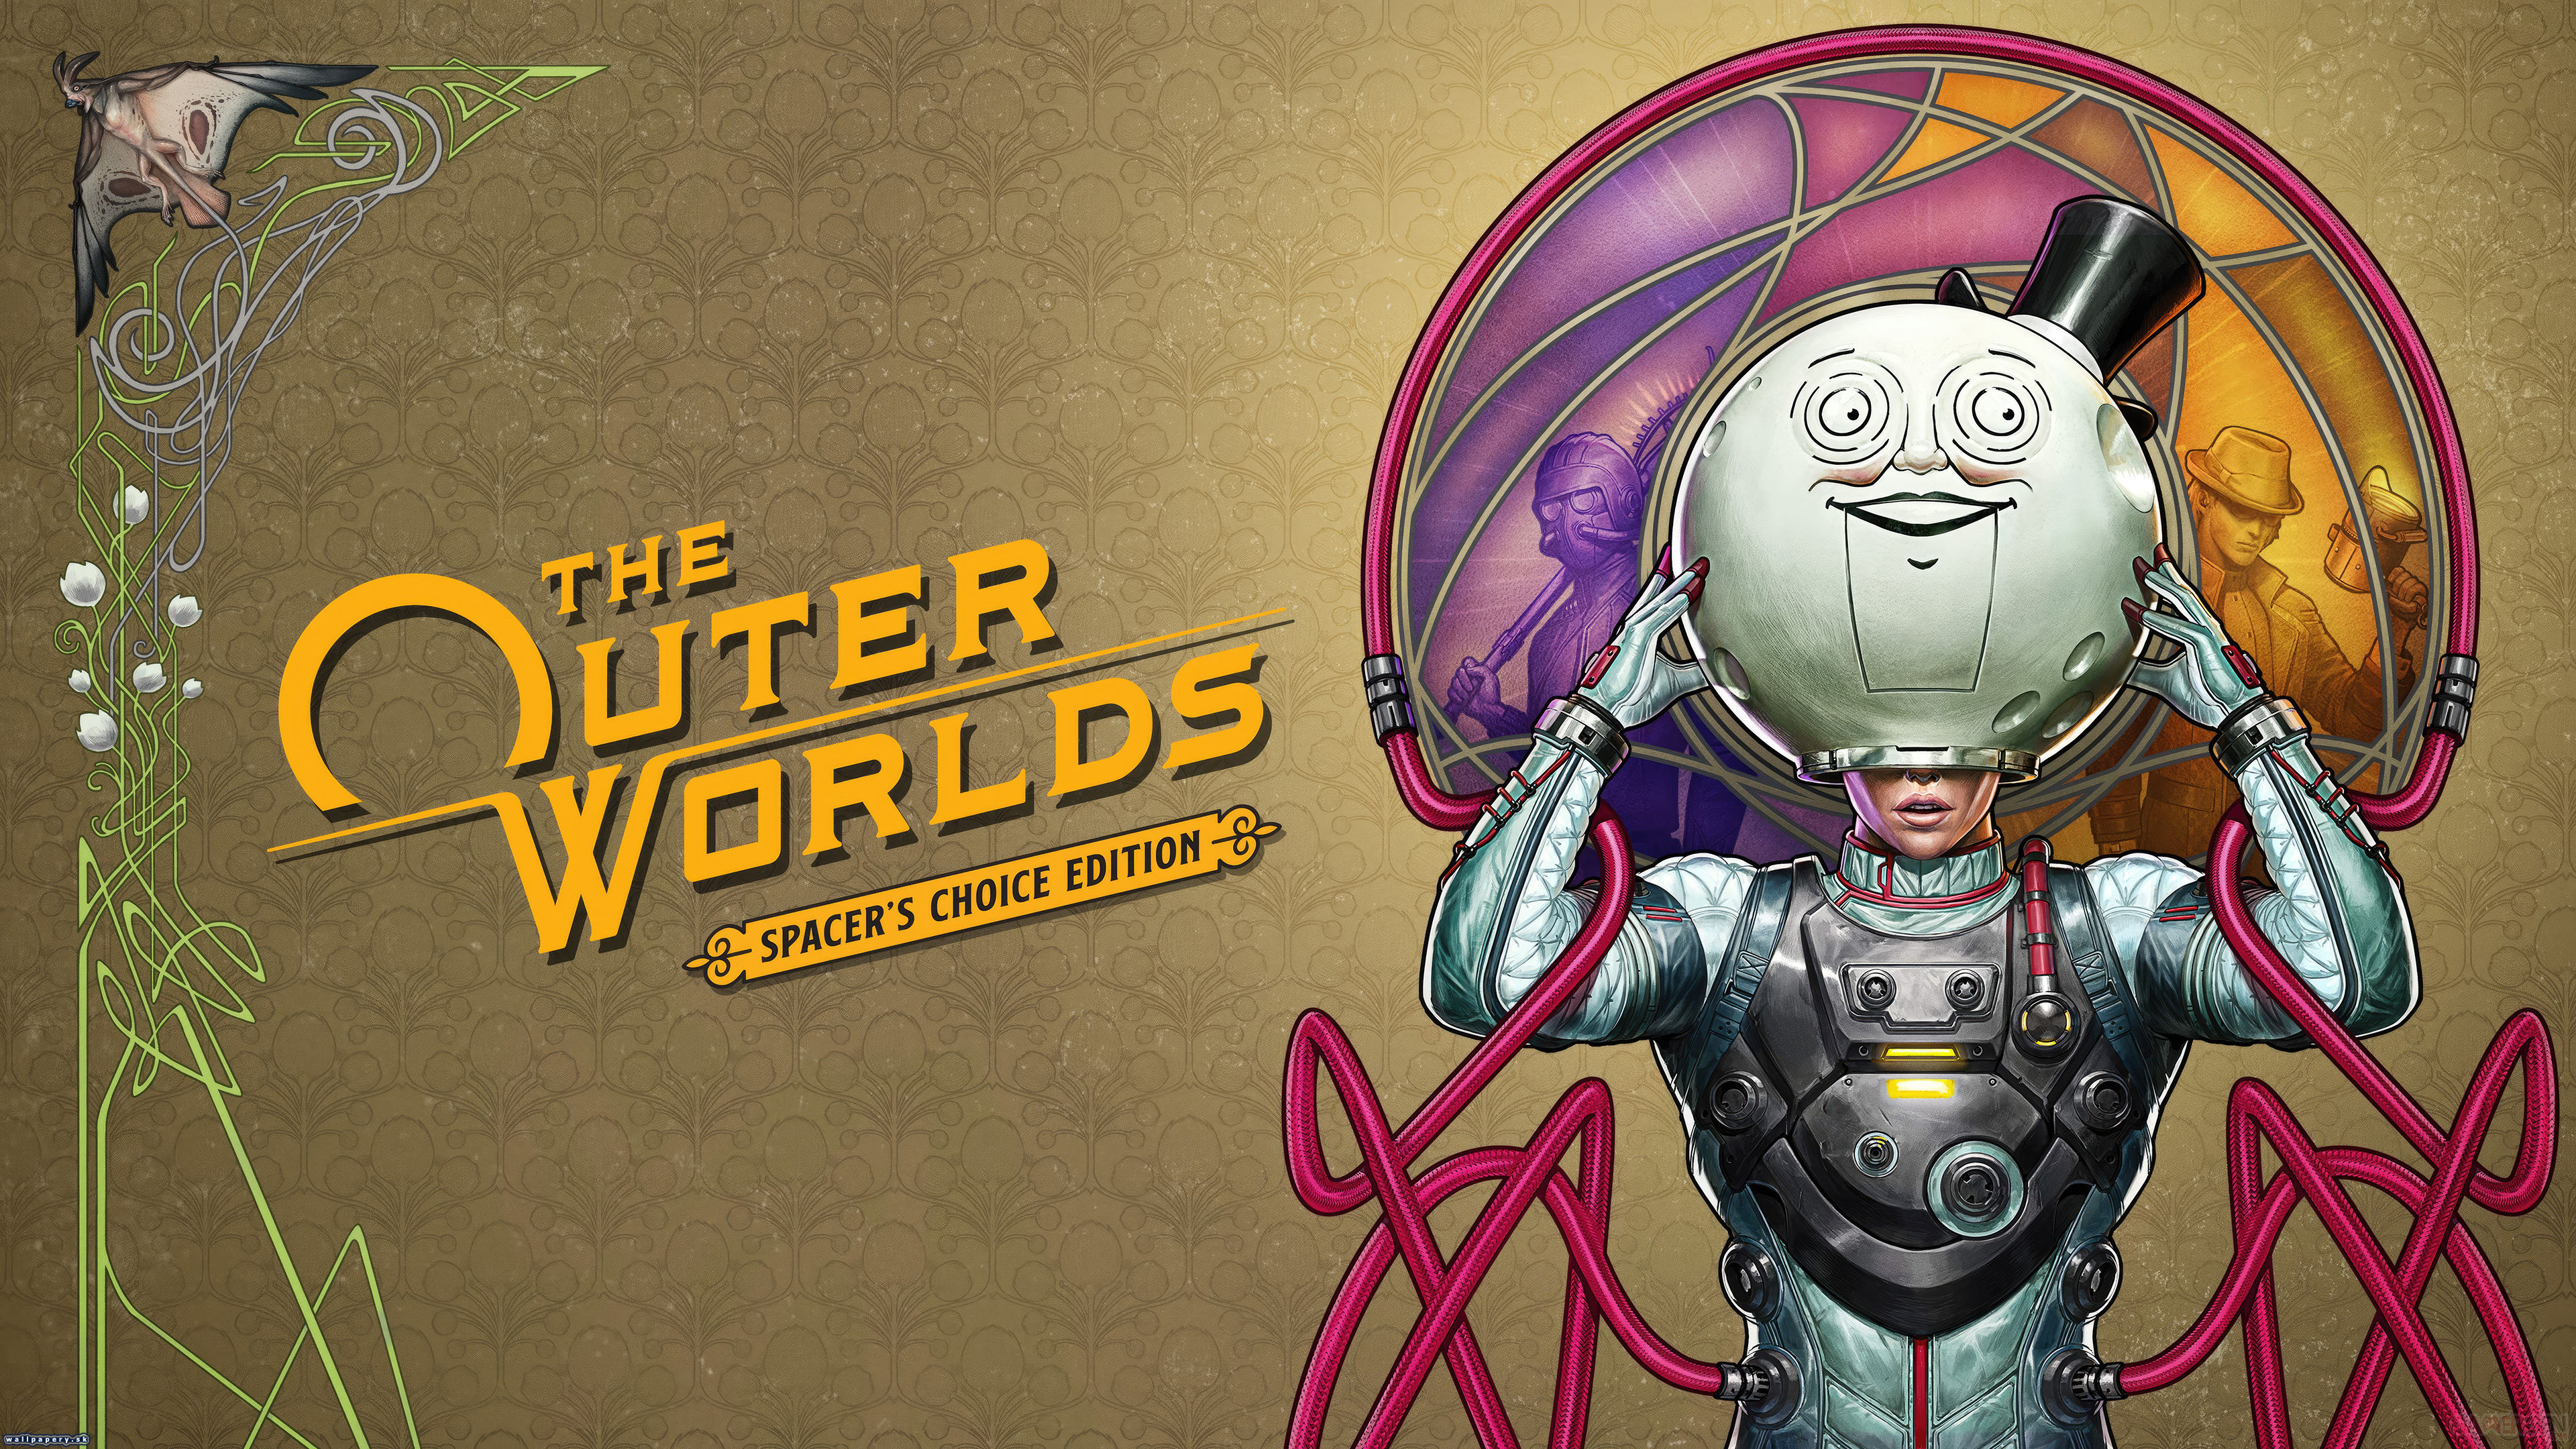 The Outer Worlds: Spacer's Choice Edition - wallpaper 1